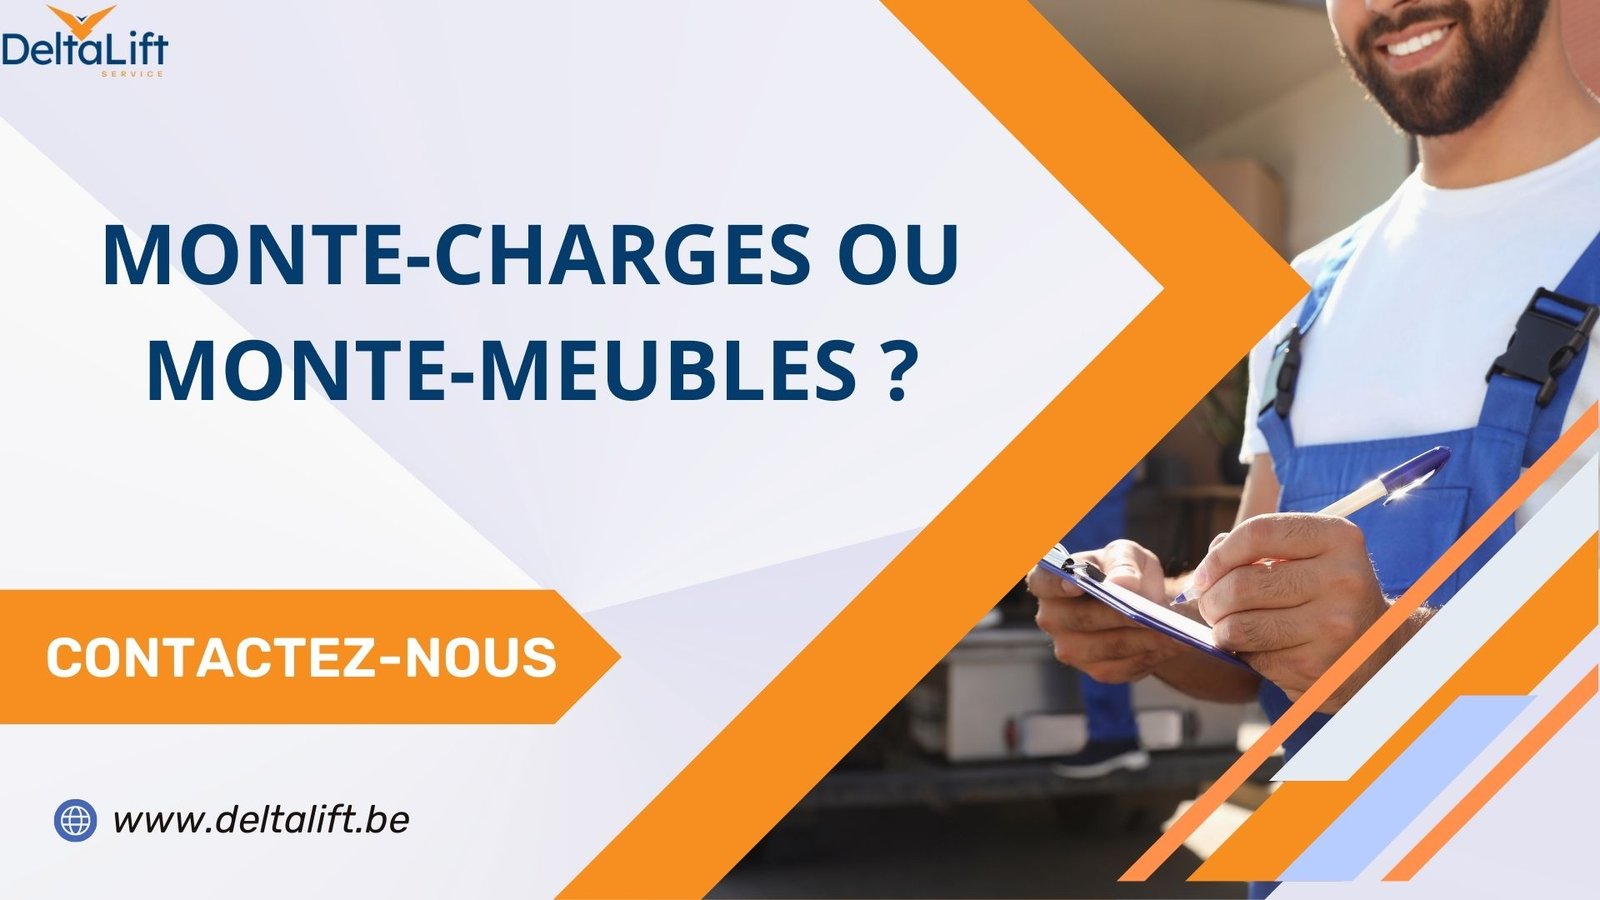 Monte-charges ou Monte-meubles ?